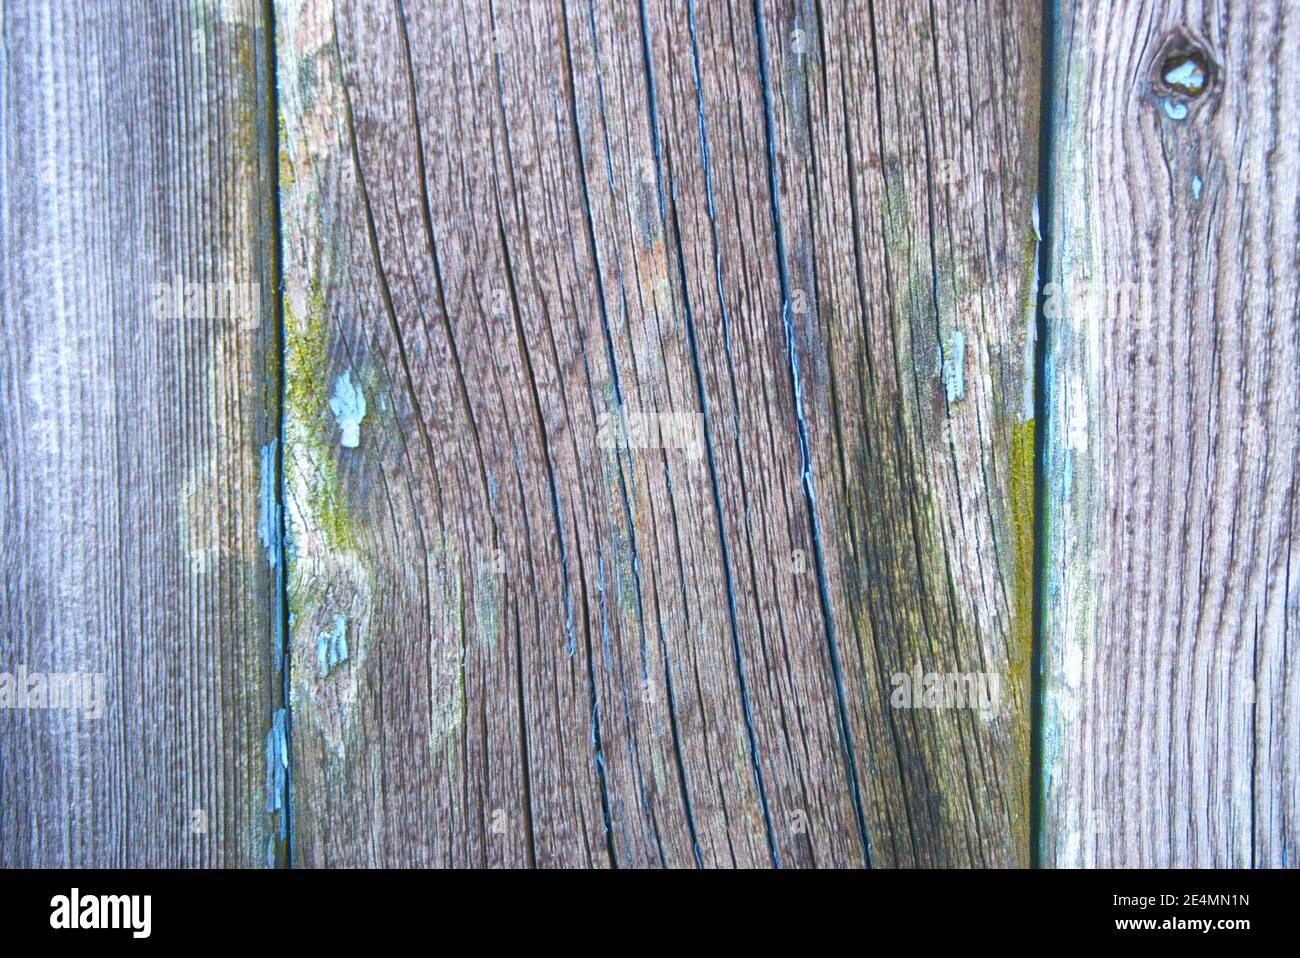 Close-up of an abstract pattern made by wood and the remains of peeling paint on an old garage door. Stock Photo